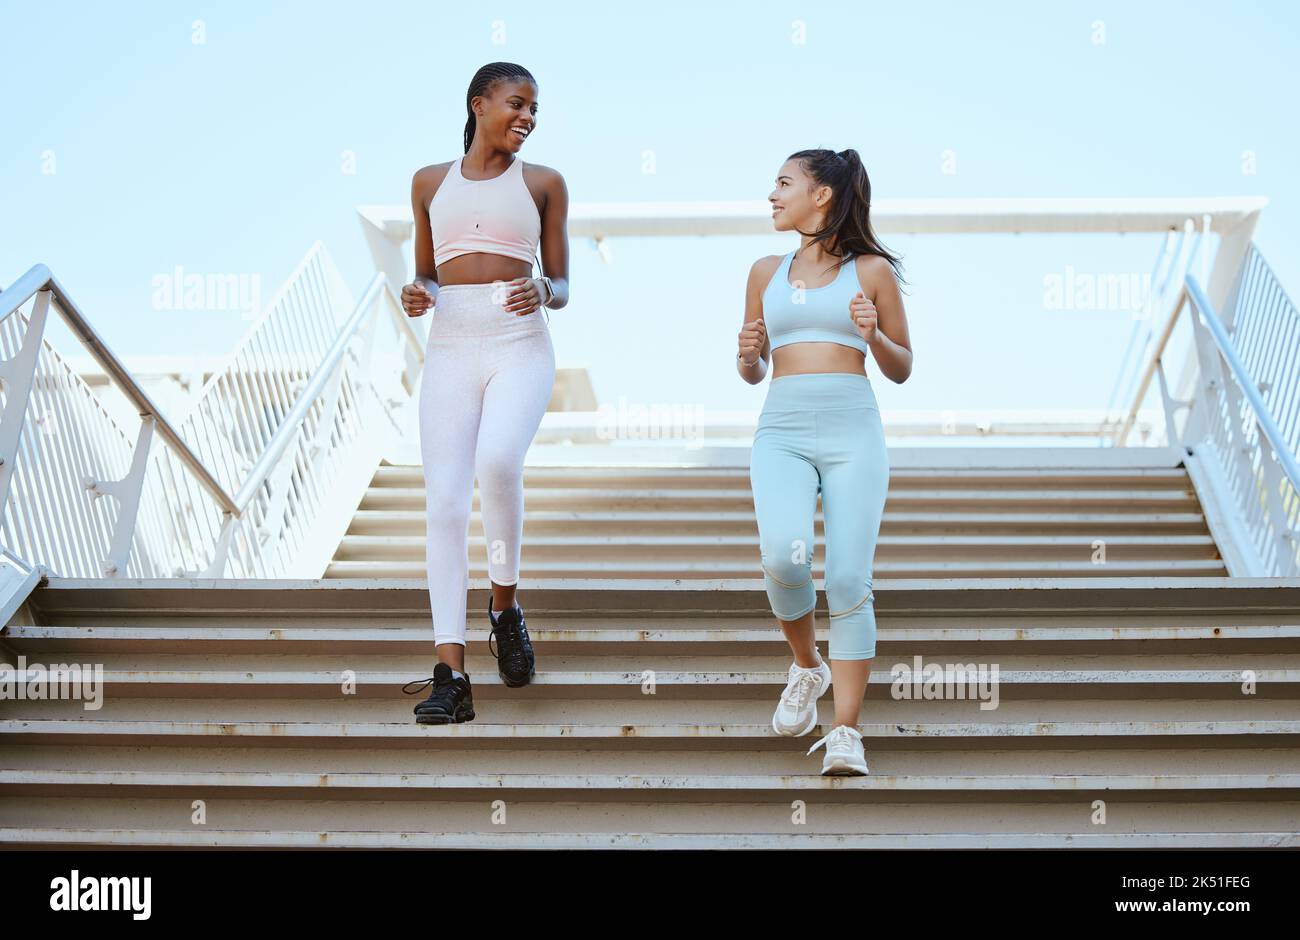 Fitness women, running steps and exercise for healthy lifestyle, wellness and marathon training in urban city outdoors. Happy athletes, runners and Stock Photo